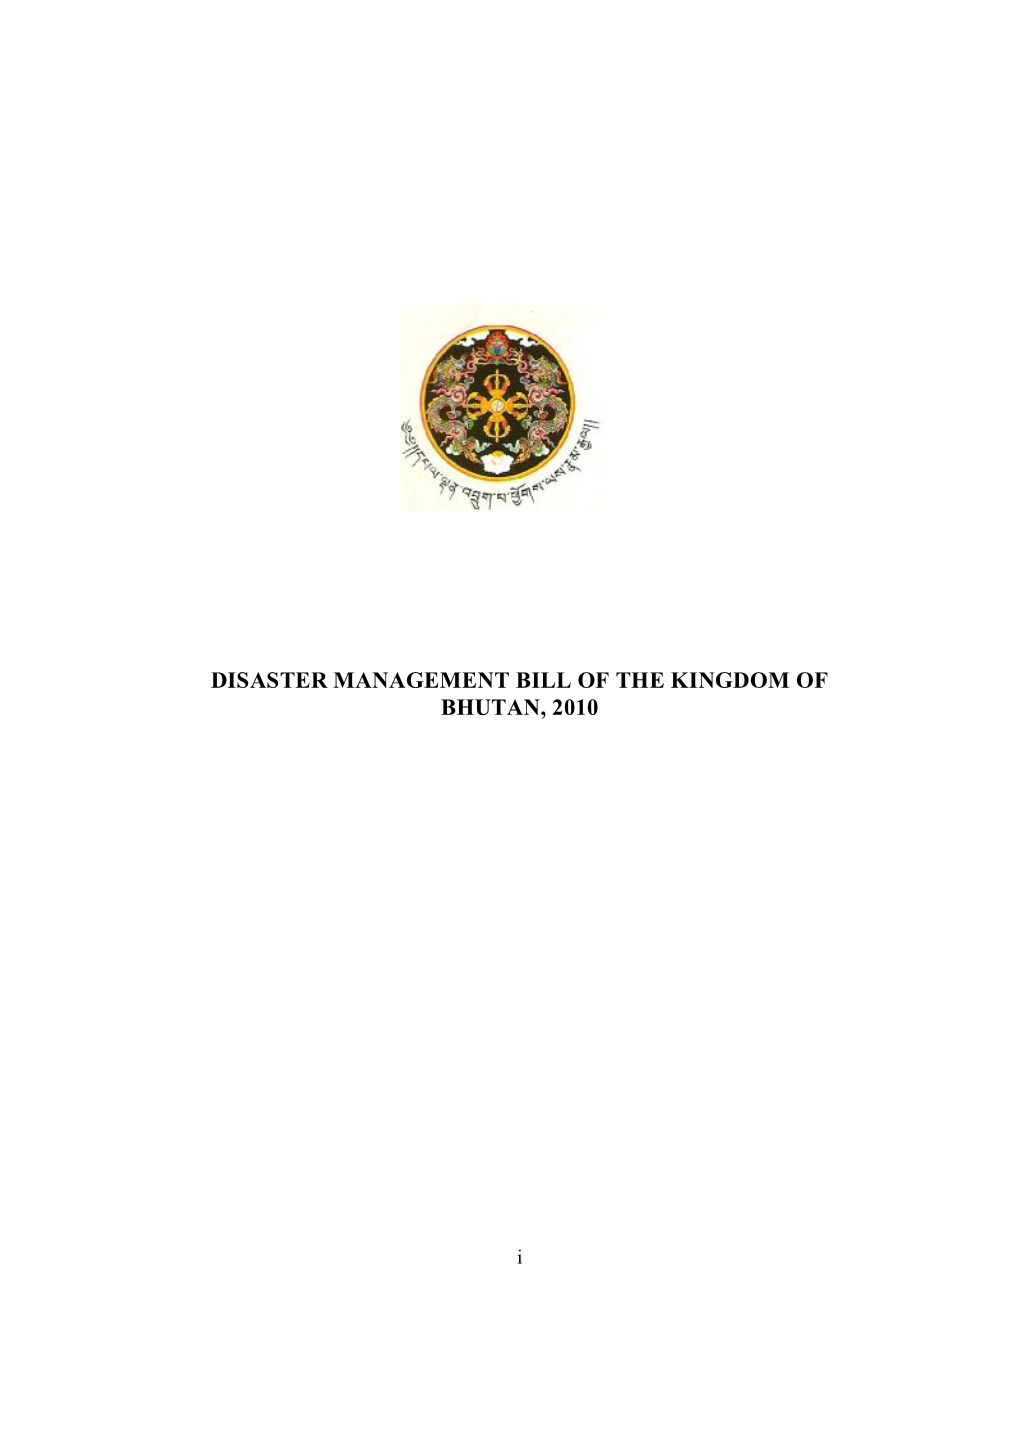 Disaster Management Bill of the Kingdom of Bhutan, 2010